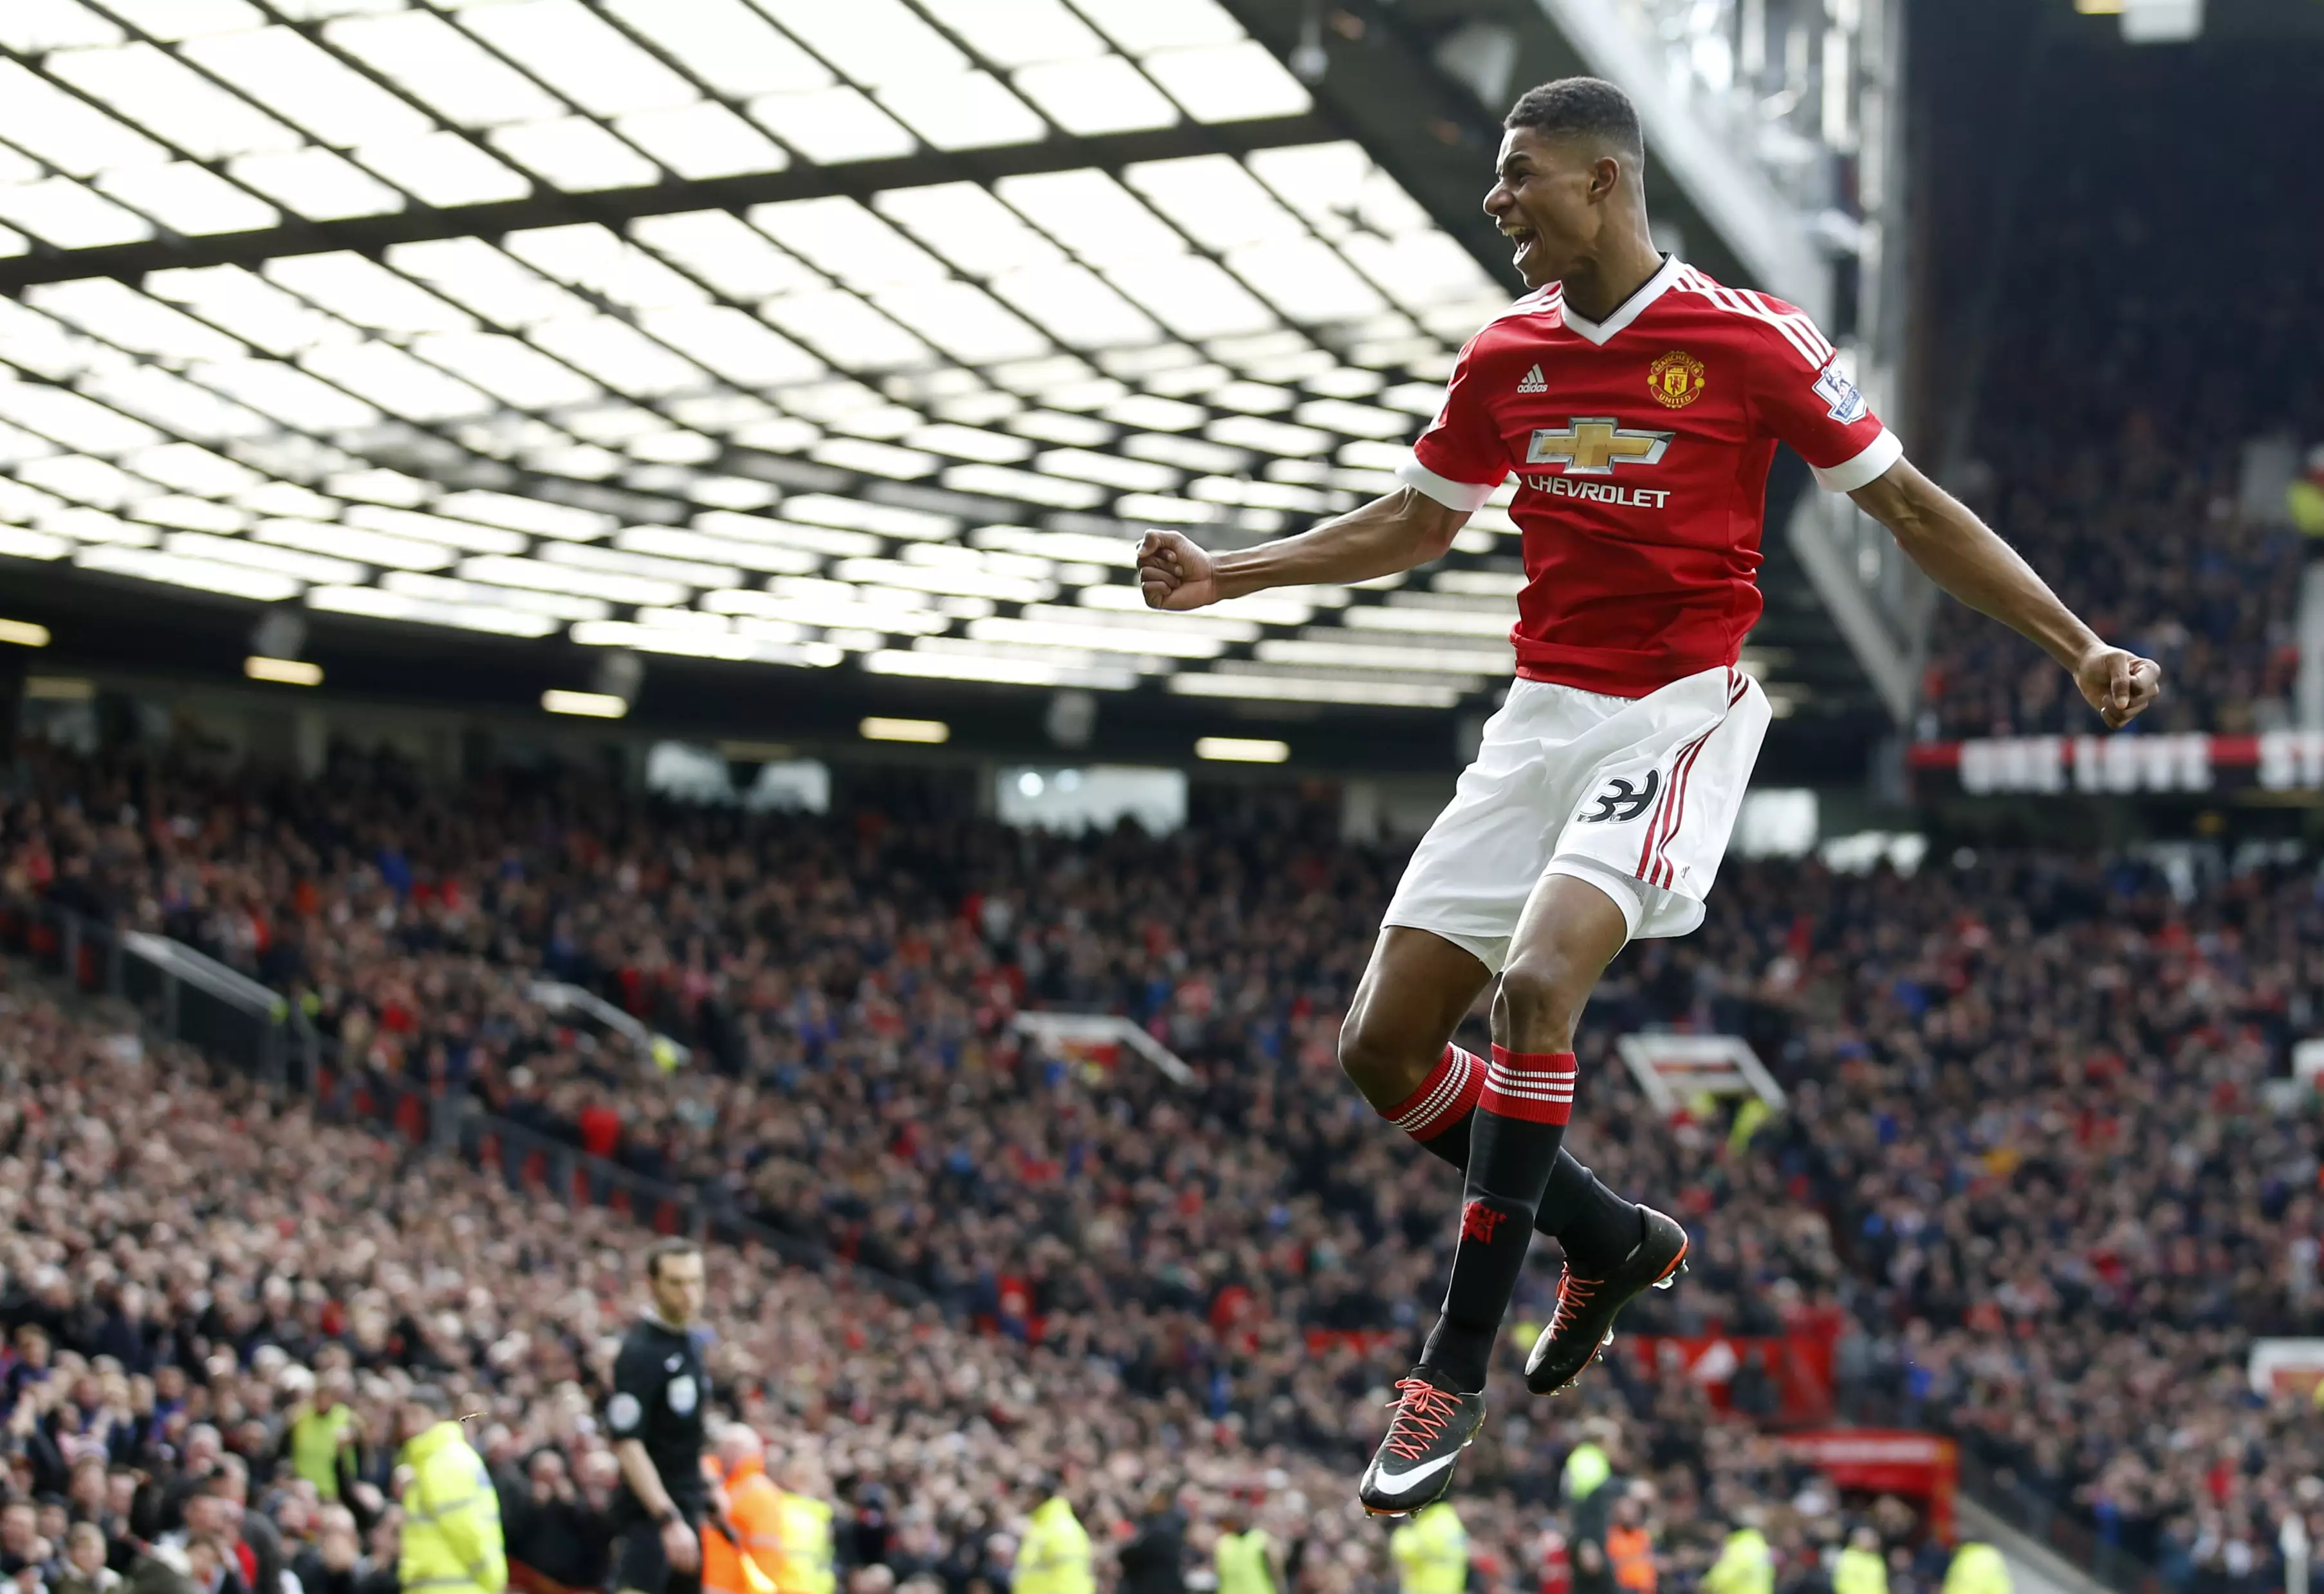 Ever since his debut Marcus Rashford has been scoring goals. Image: PA Images